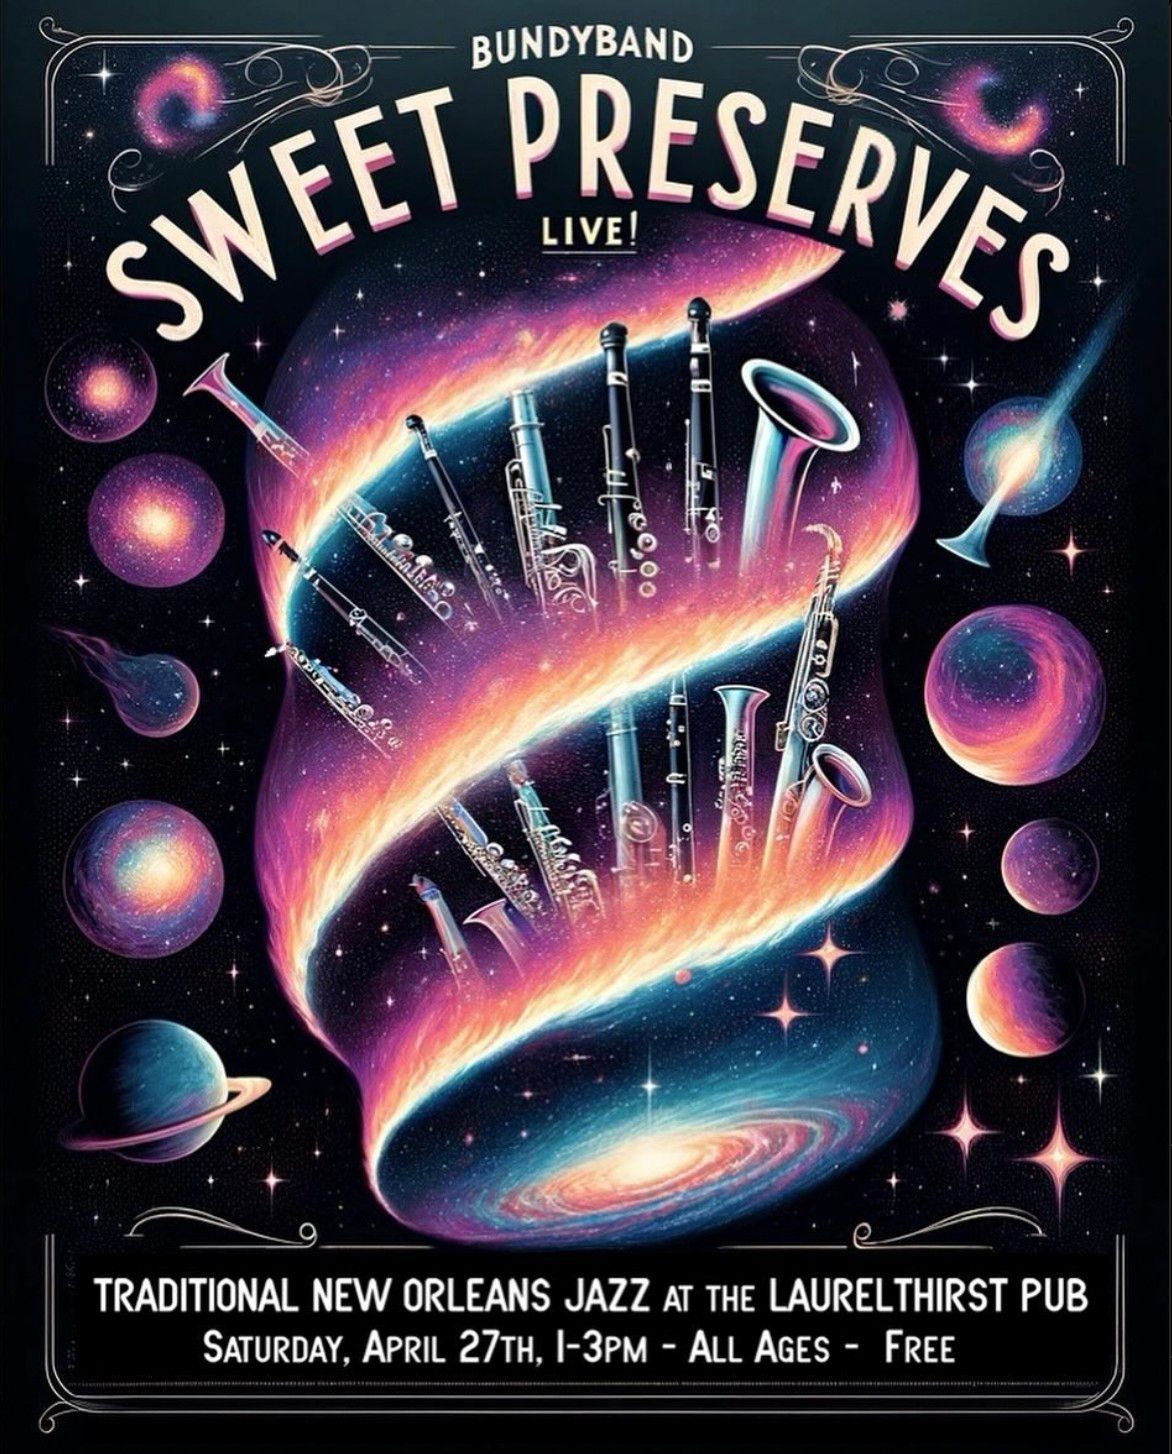 Sweet Preserves Live at the Laurelthirst Pub! All Ages & Free!